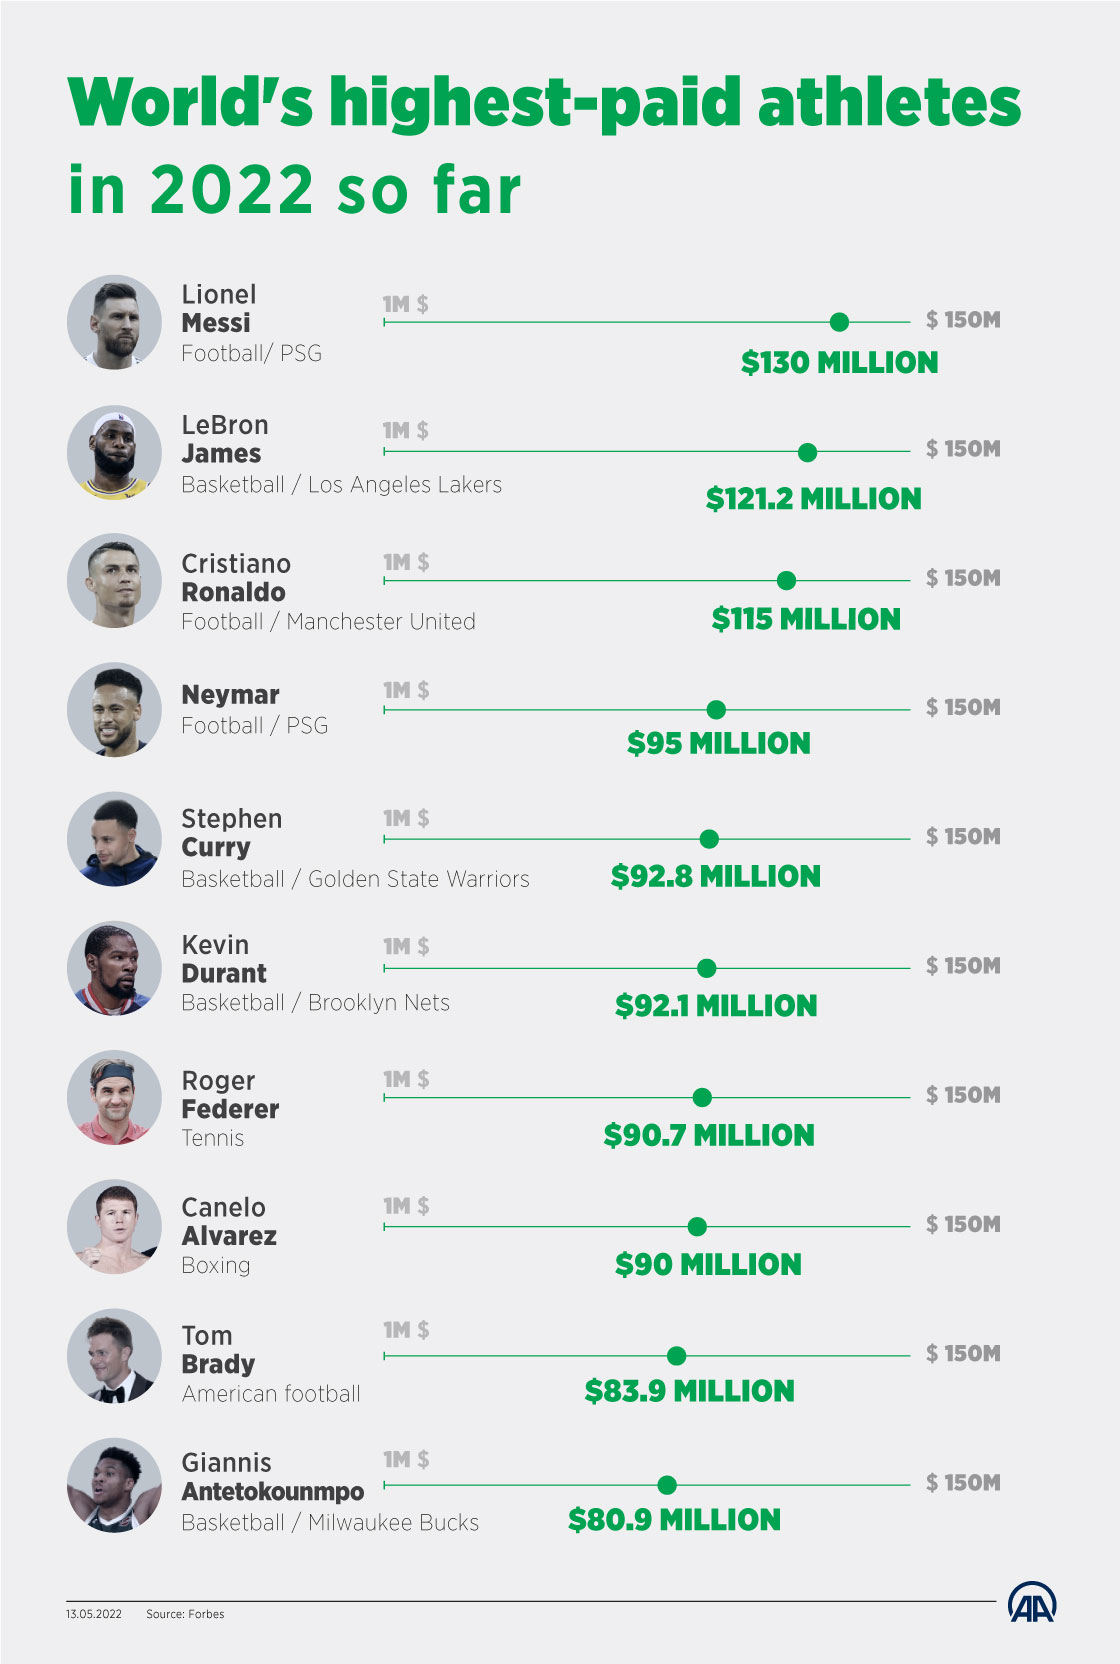 Messi world's highest-paid athlete on Forbes 2022 list 